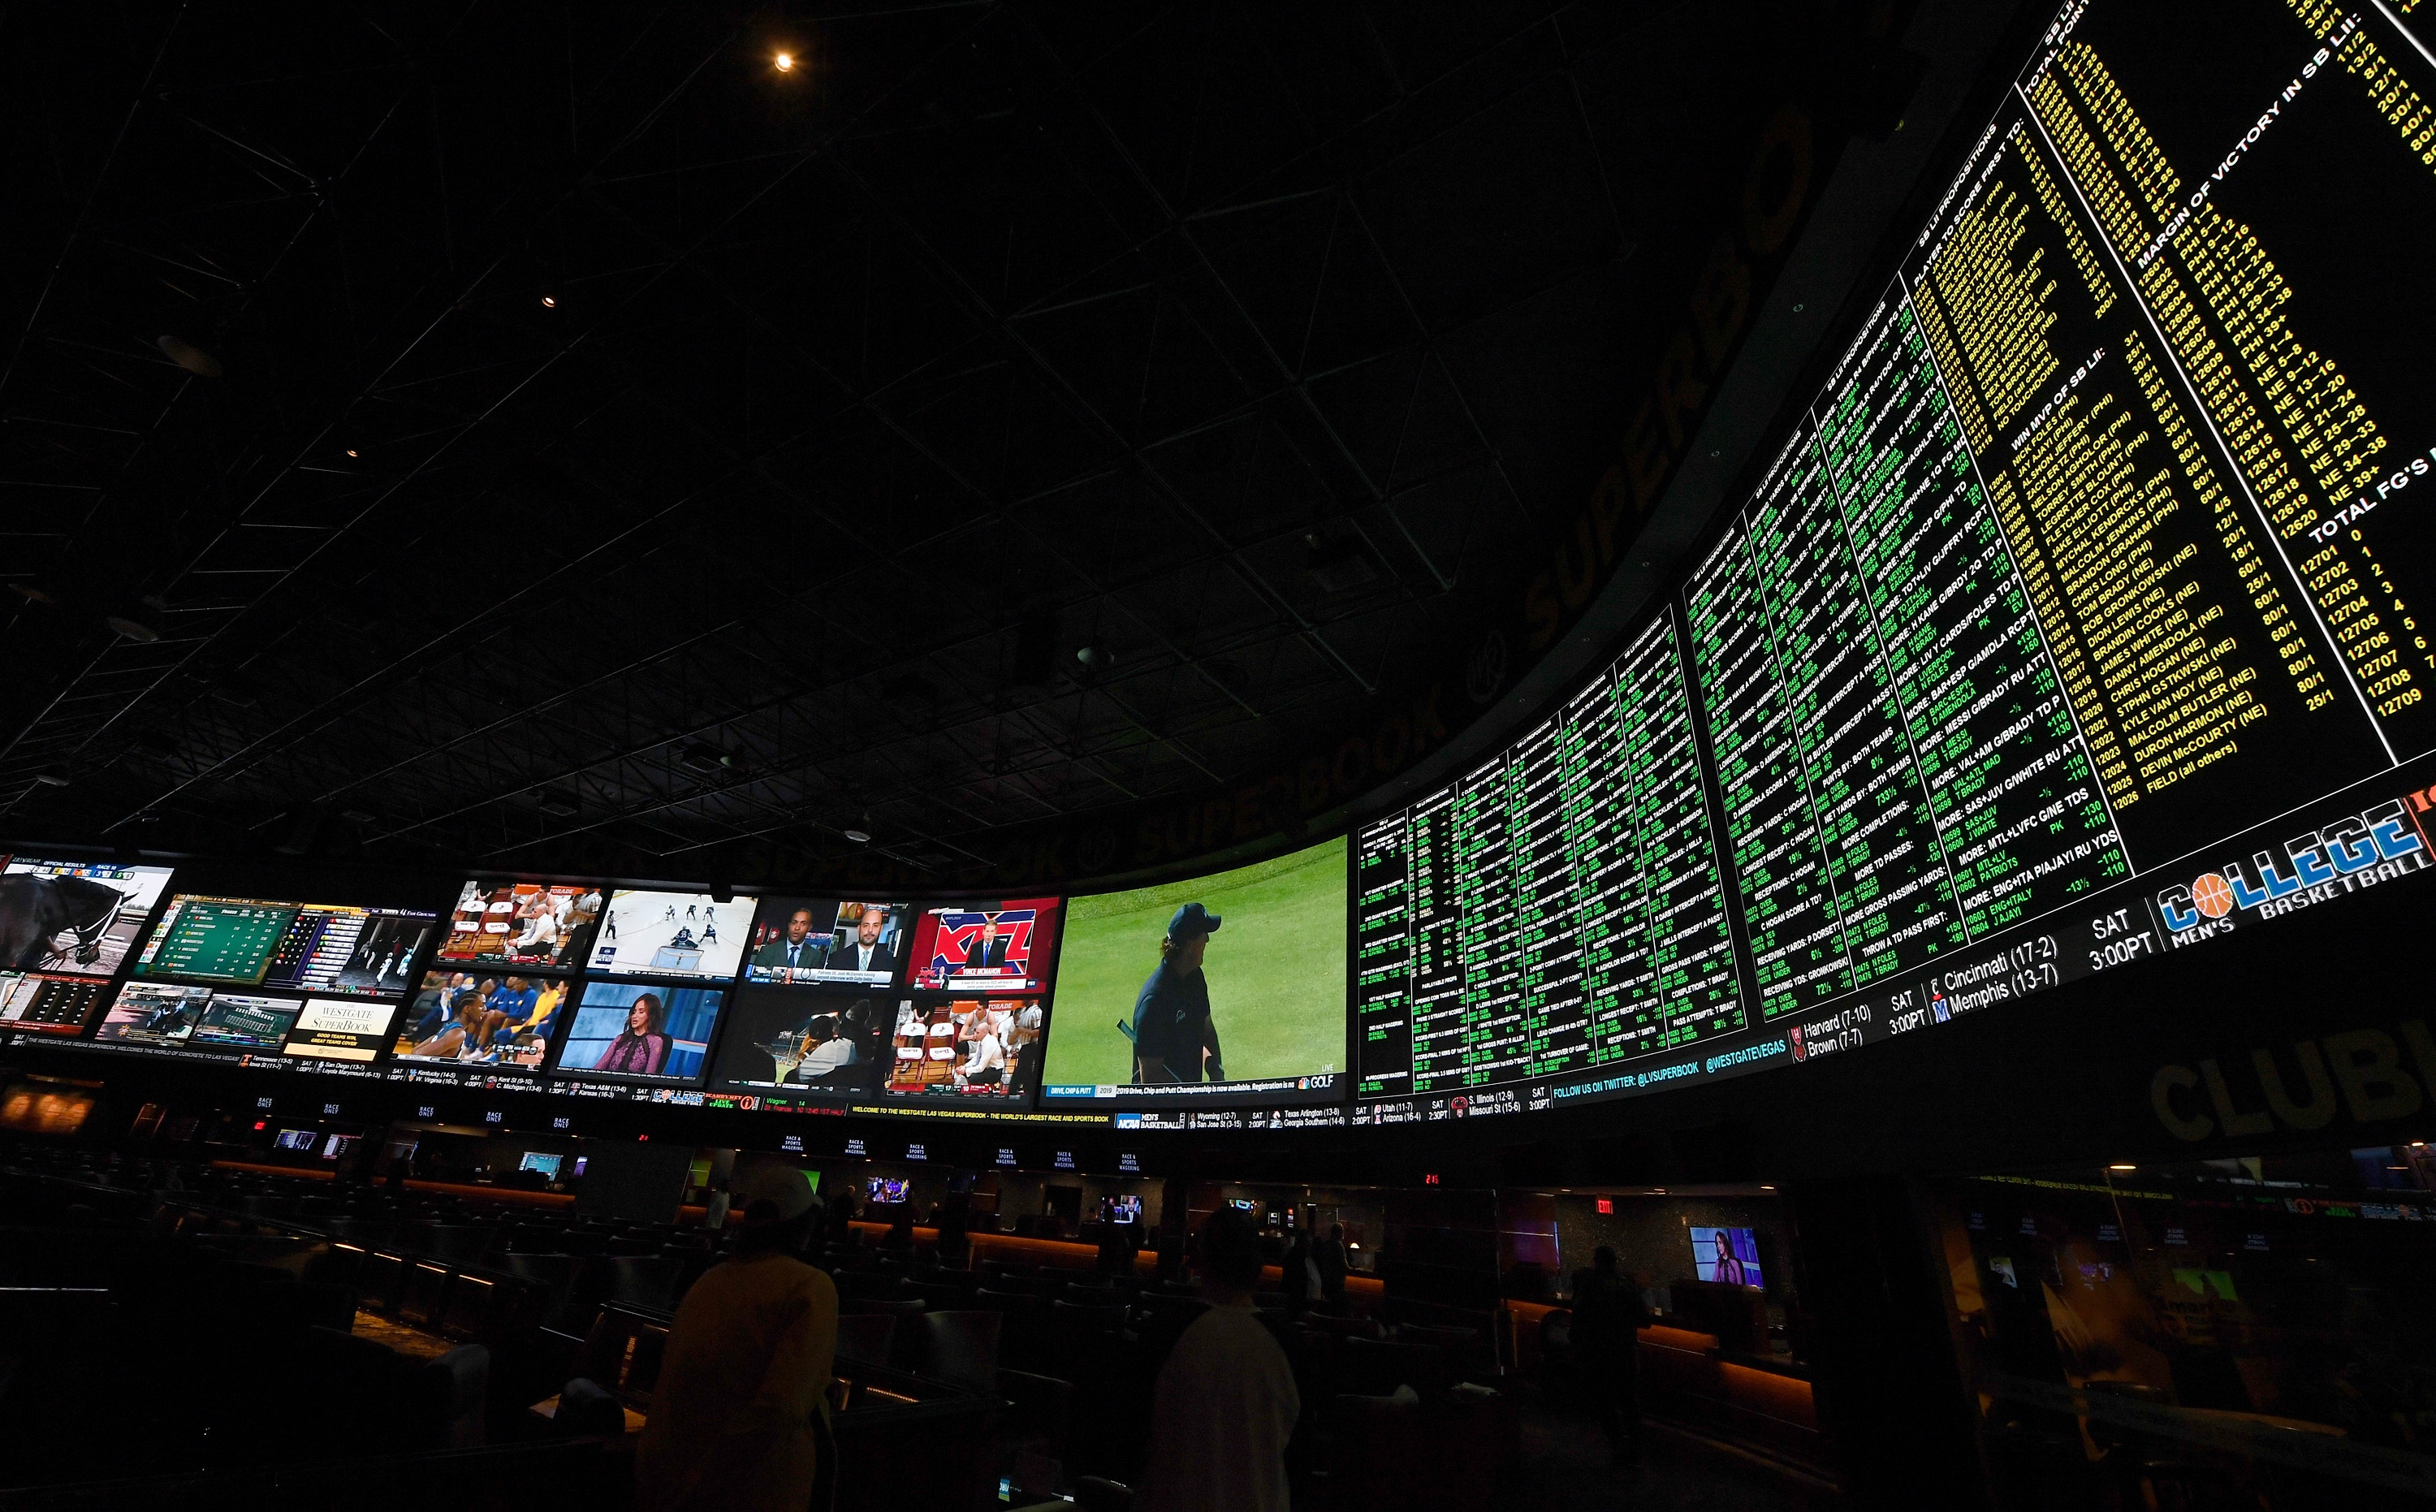 Some of the more than 400 proposition bets for Super Bowl LI between the Philadelphia Eagles and the New England Patriots are displayed at the Race &amp; Sports SuperBook at the Westgate Las Vegas Resort &amp; Casino on January 26, 2018 in Las Vegas, Nevada.